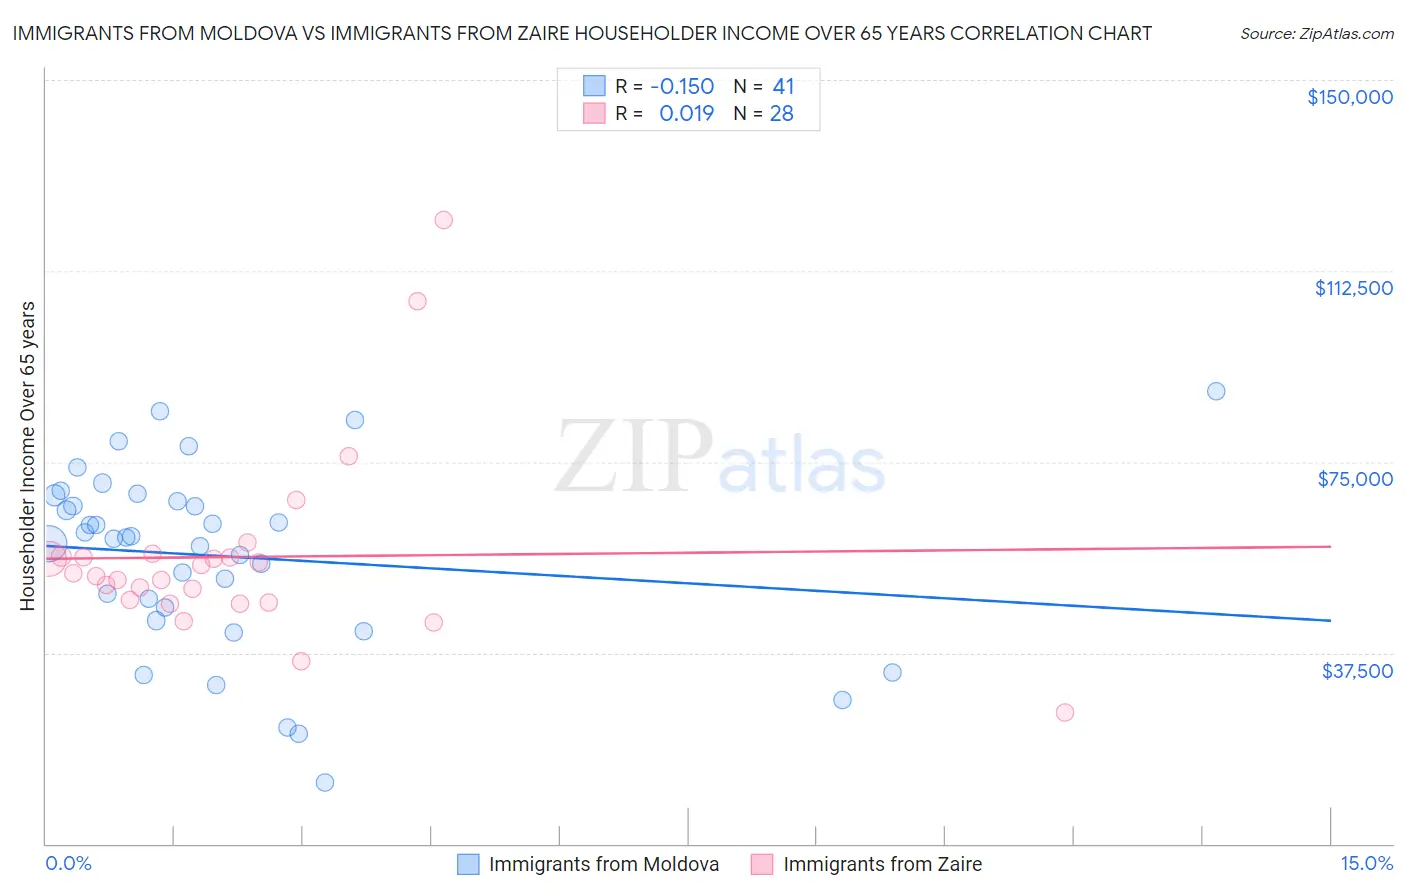 Immigrants from Moldova vs Immigrants from Zaire Householder Income Over 65 years